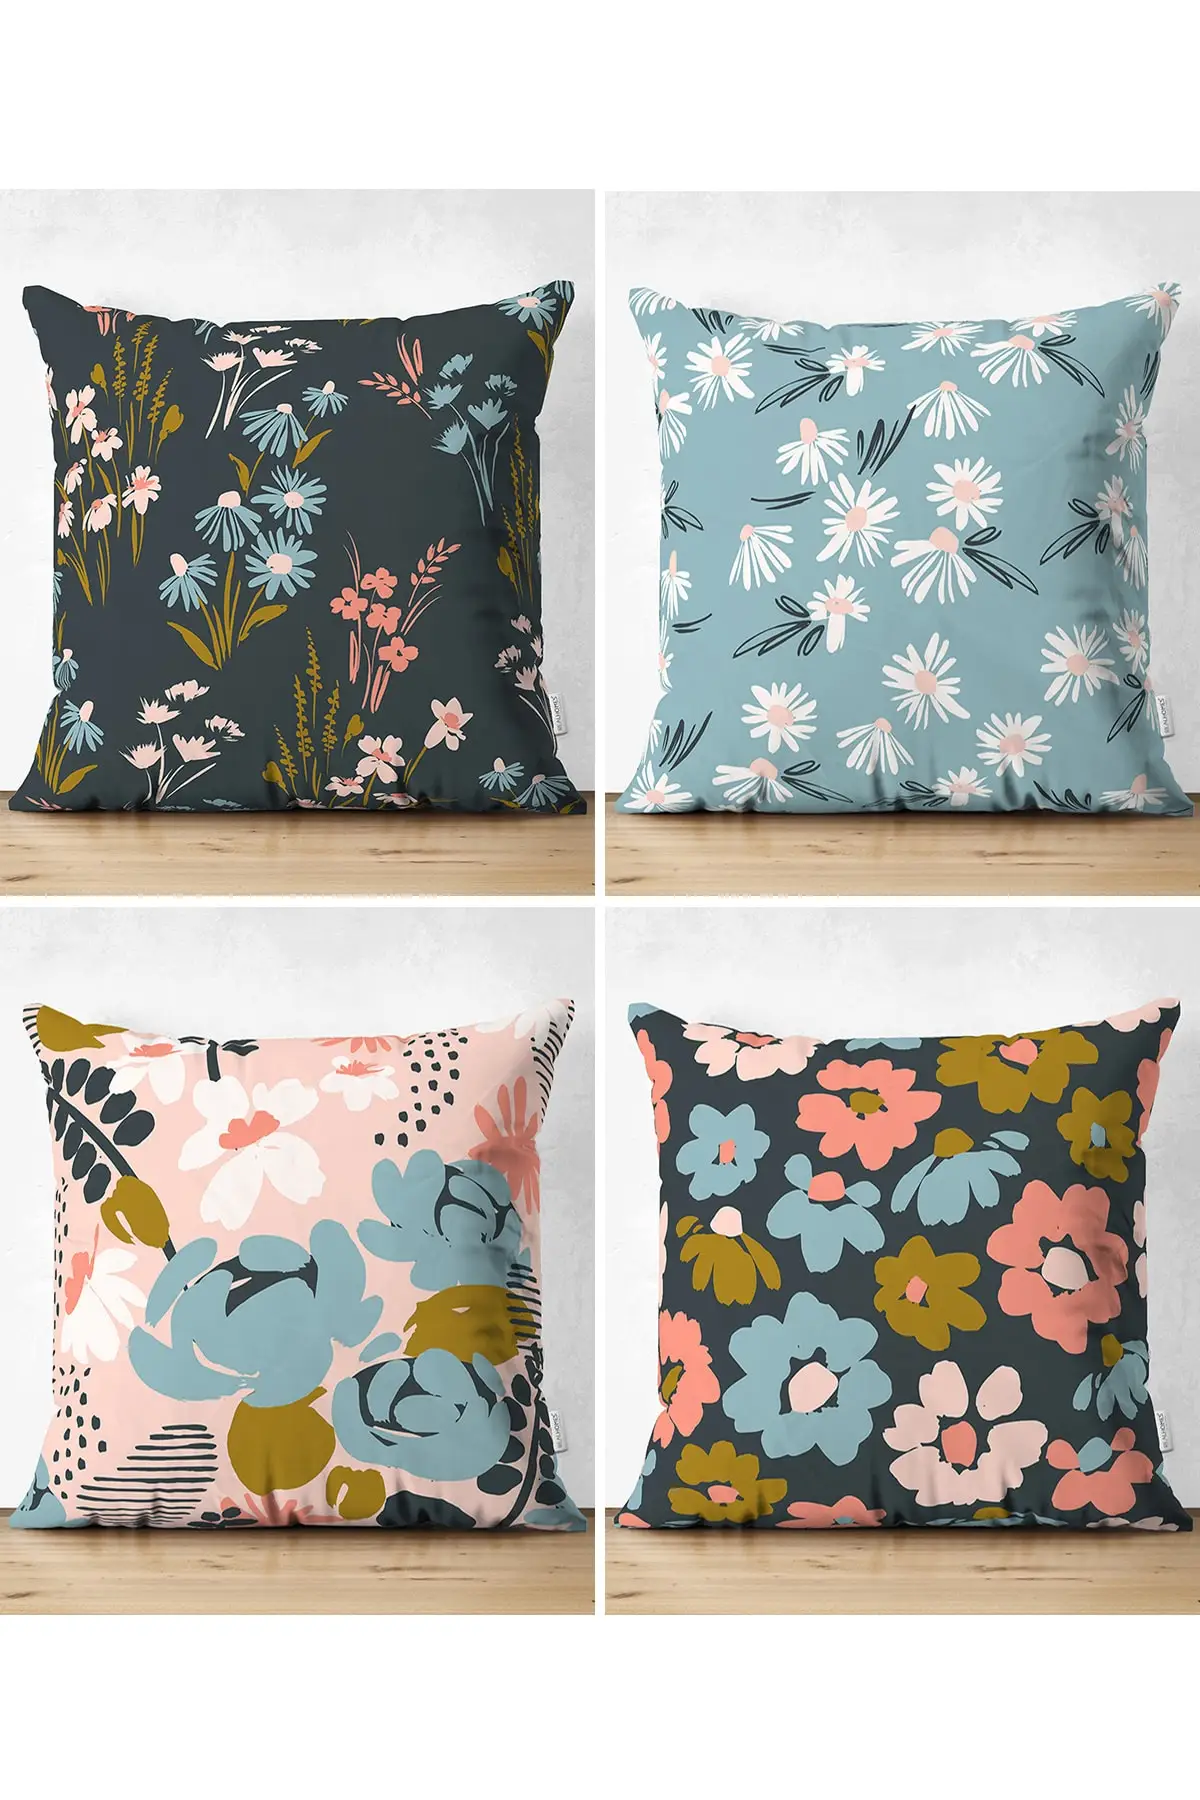 

4'Lü Double-Sided Color On the Ground With Flower Pattern Modern Suede Cushion Pillow Decorate Case Set High Quality Stylish Home Garden Room Kitchen Gift Useful Decorative Colorful